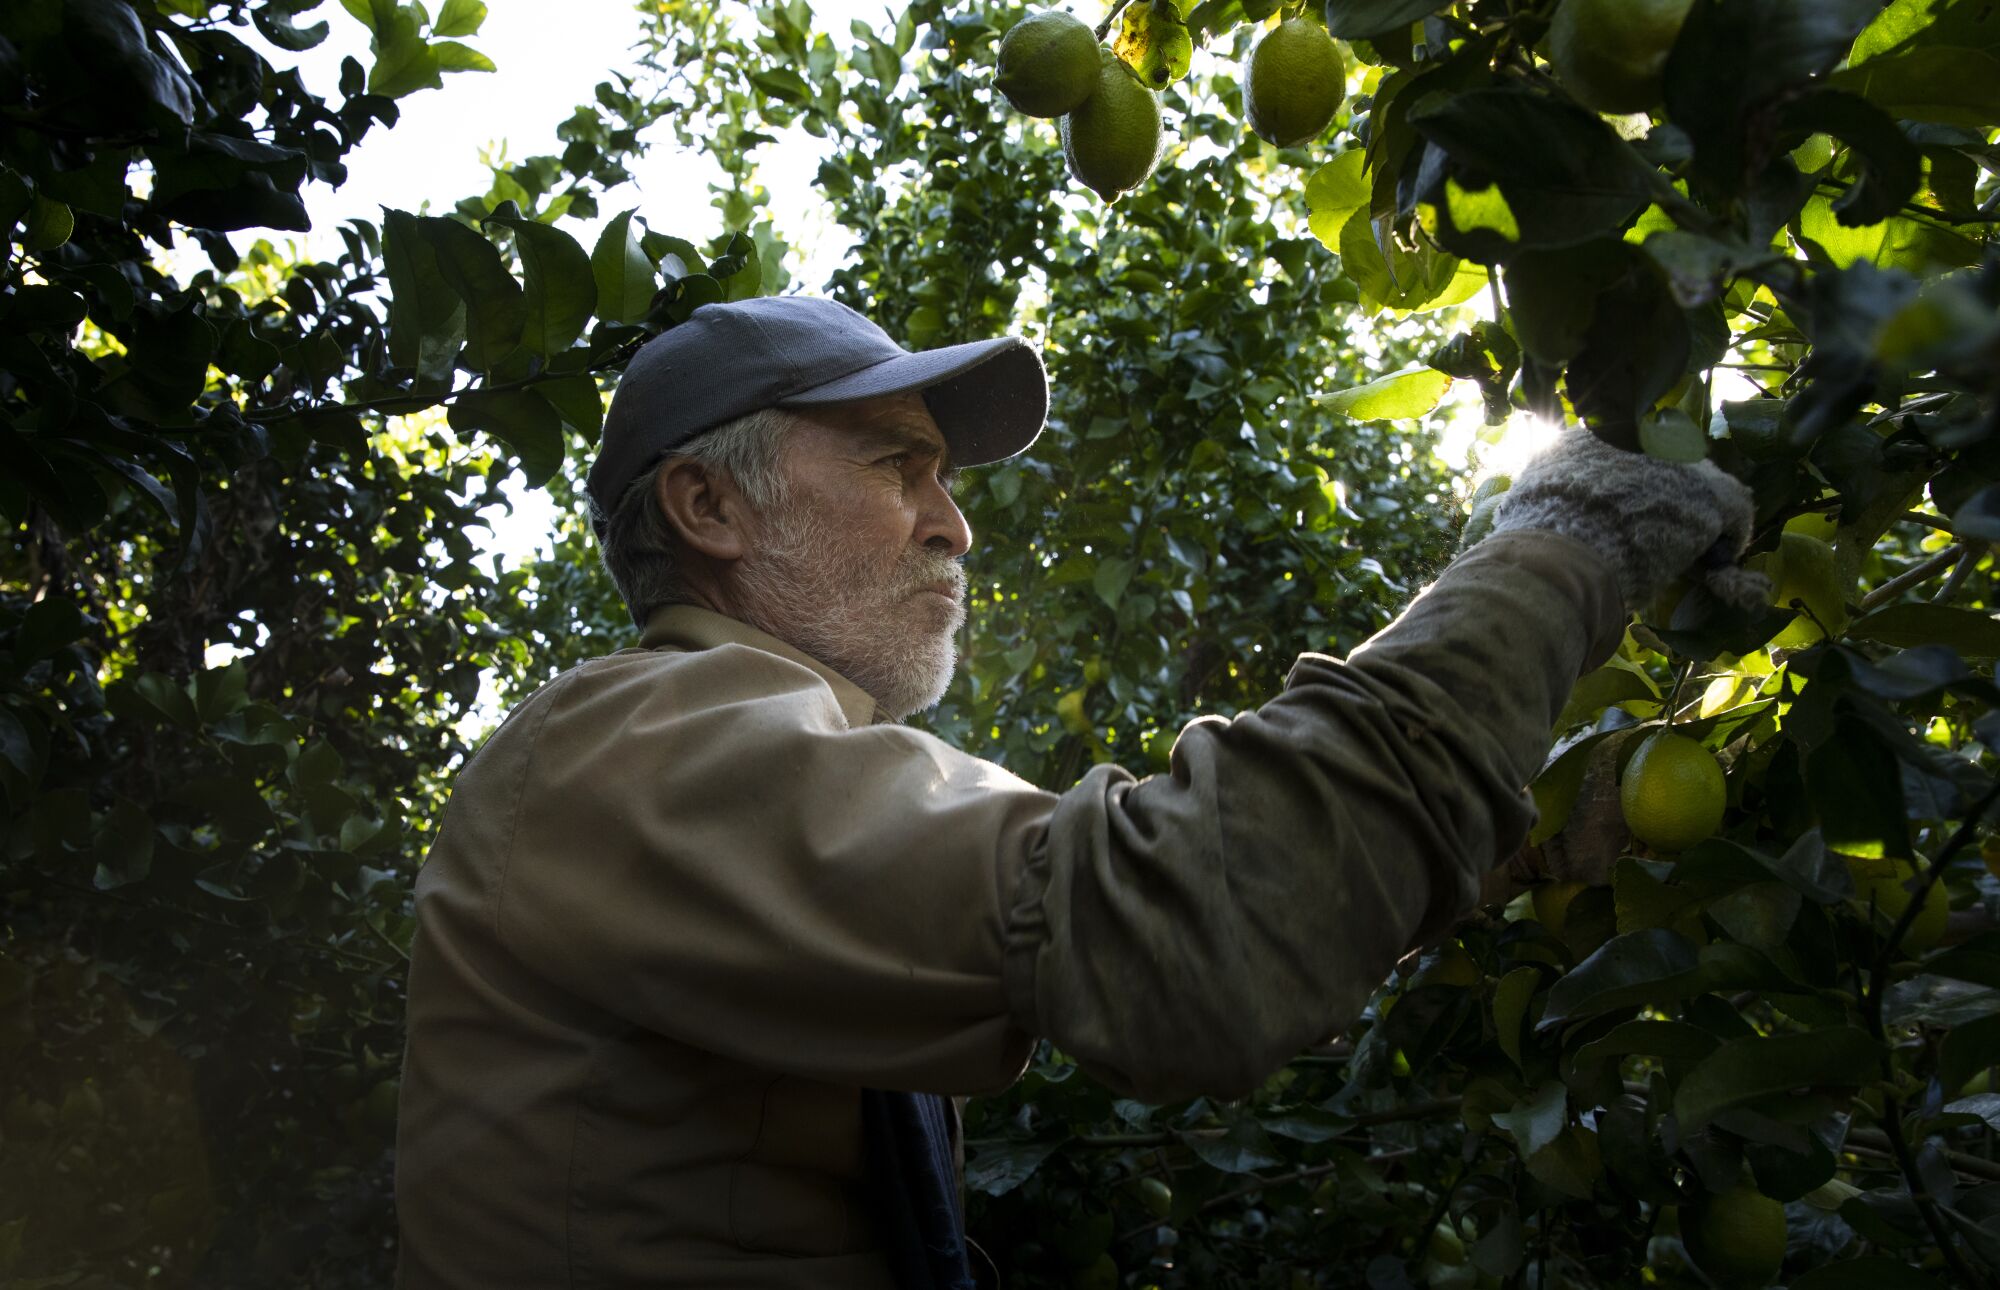 J. Canales picks limes at Rancho Guejito's property in the San Pasqual Valley.